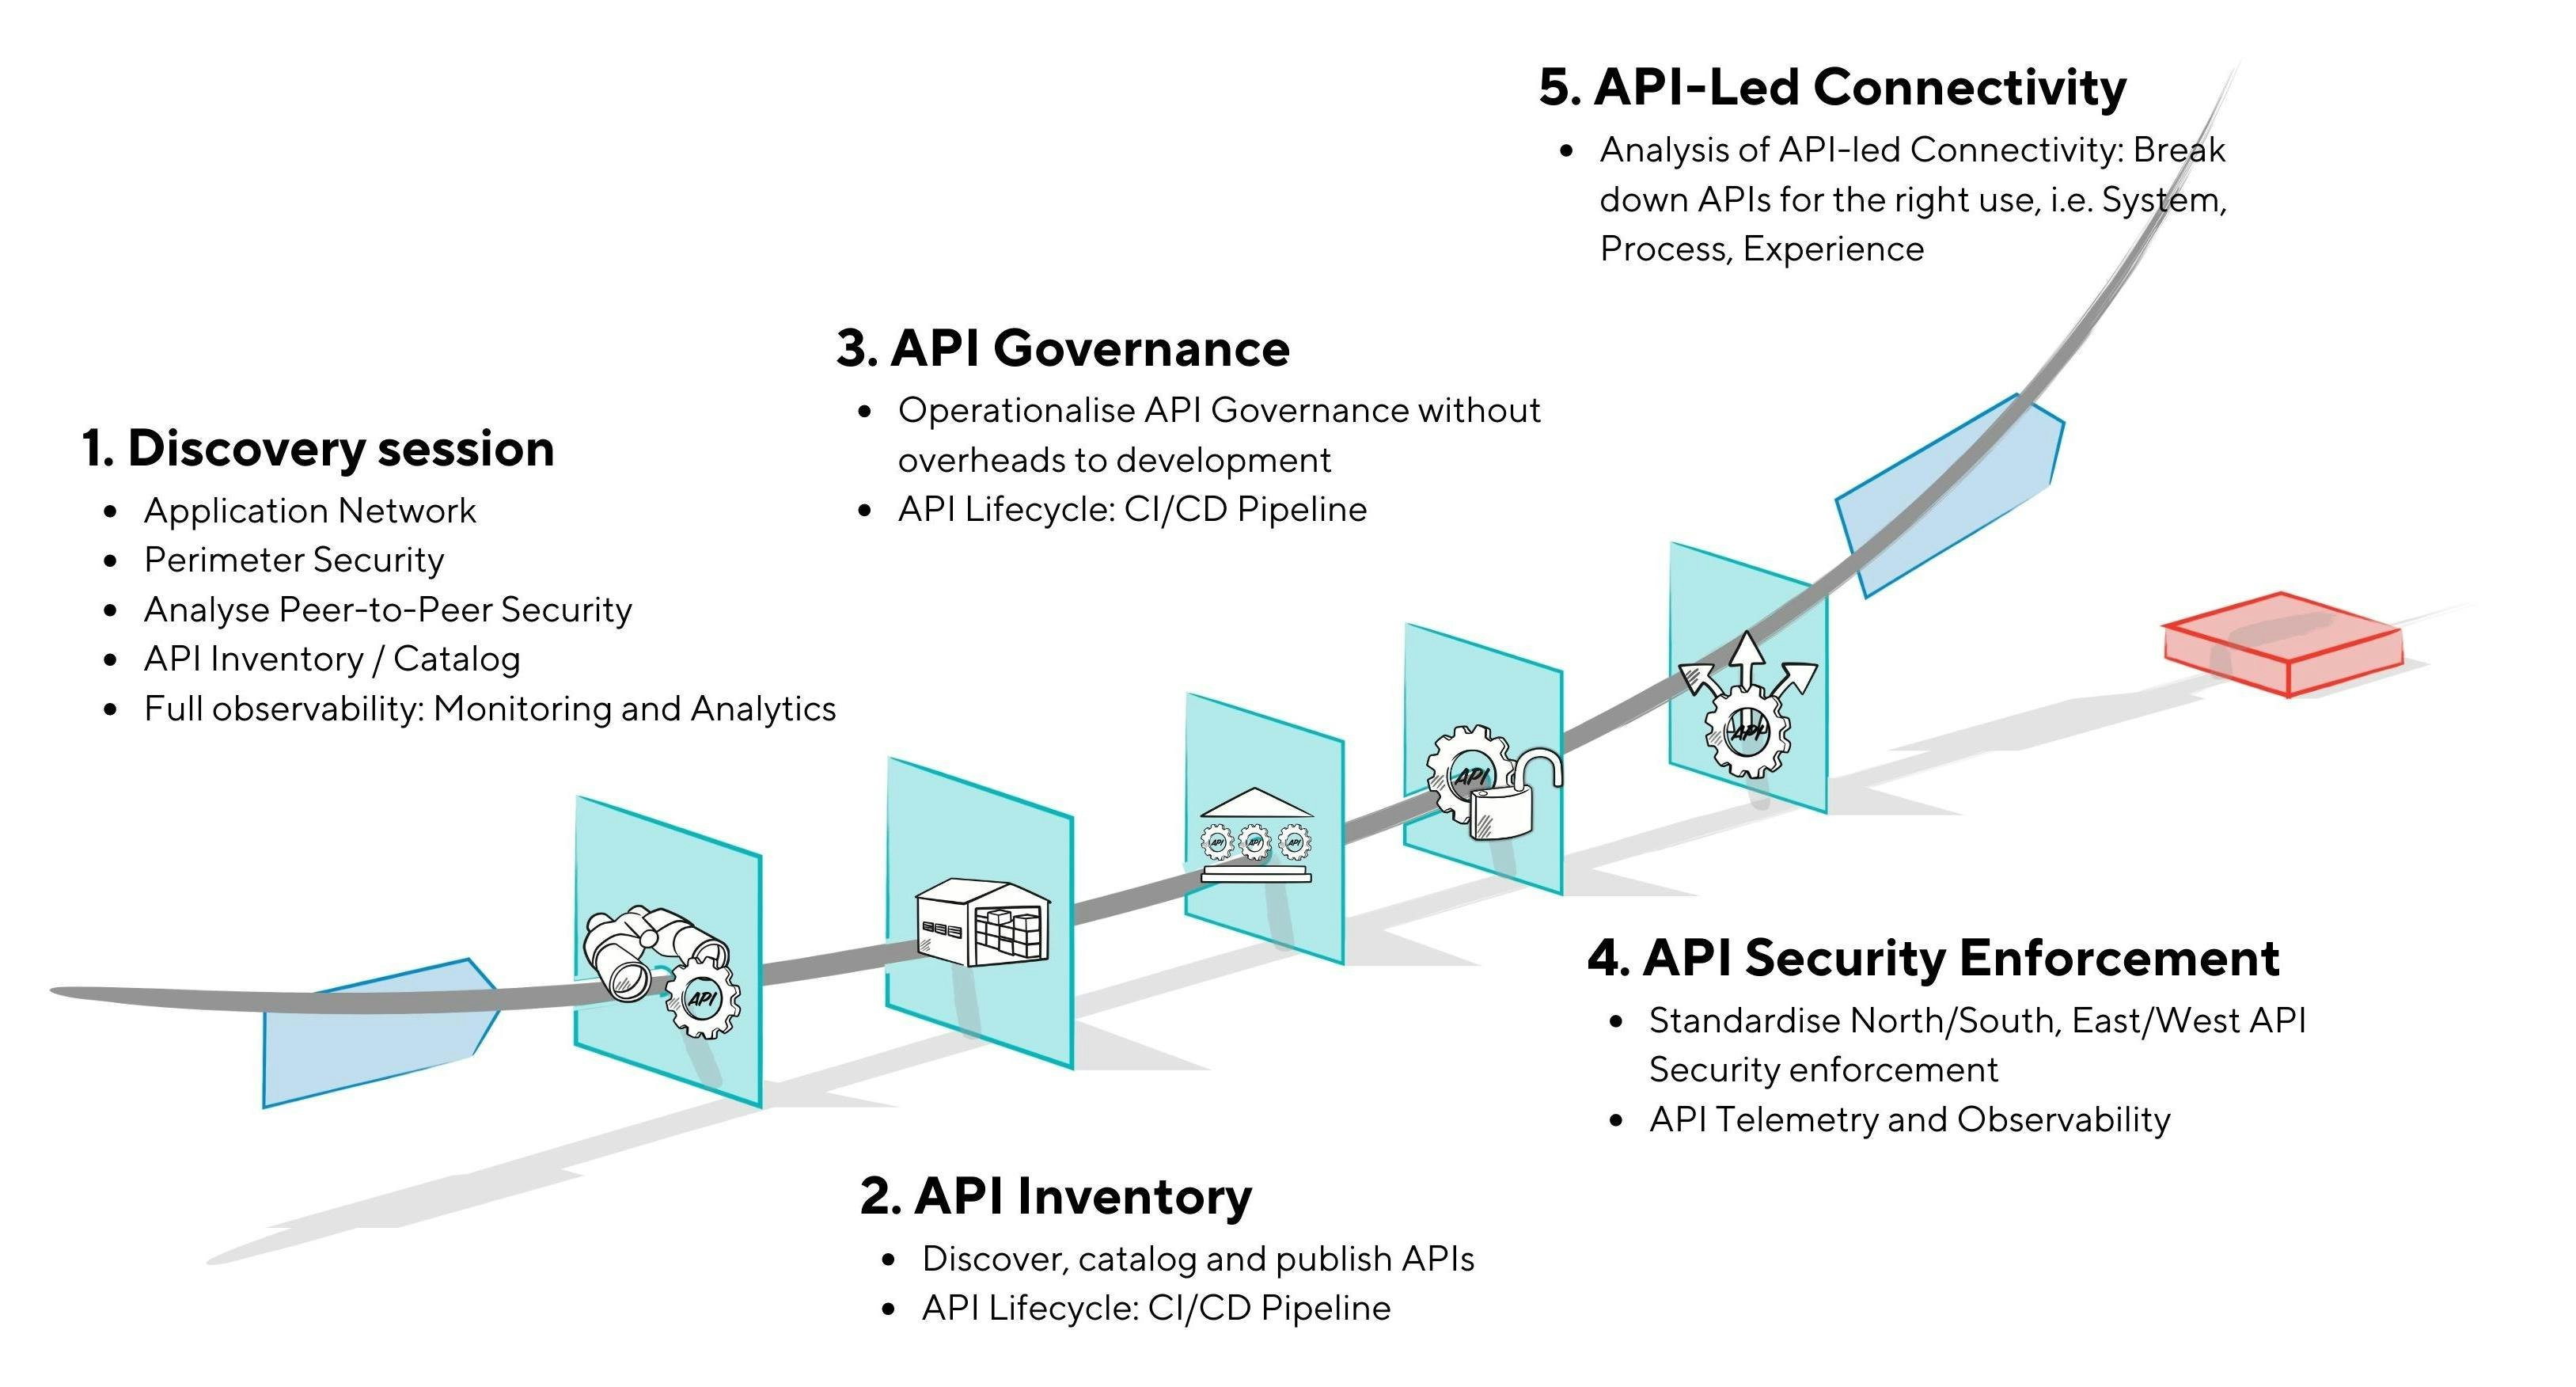 Our approach to implementing API Security